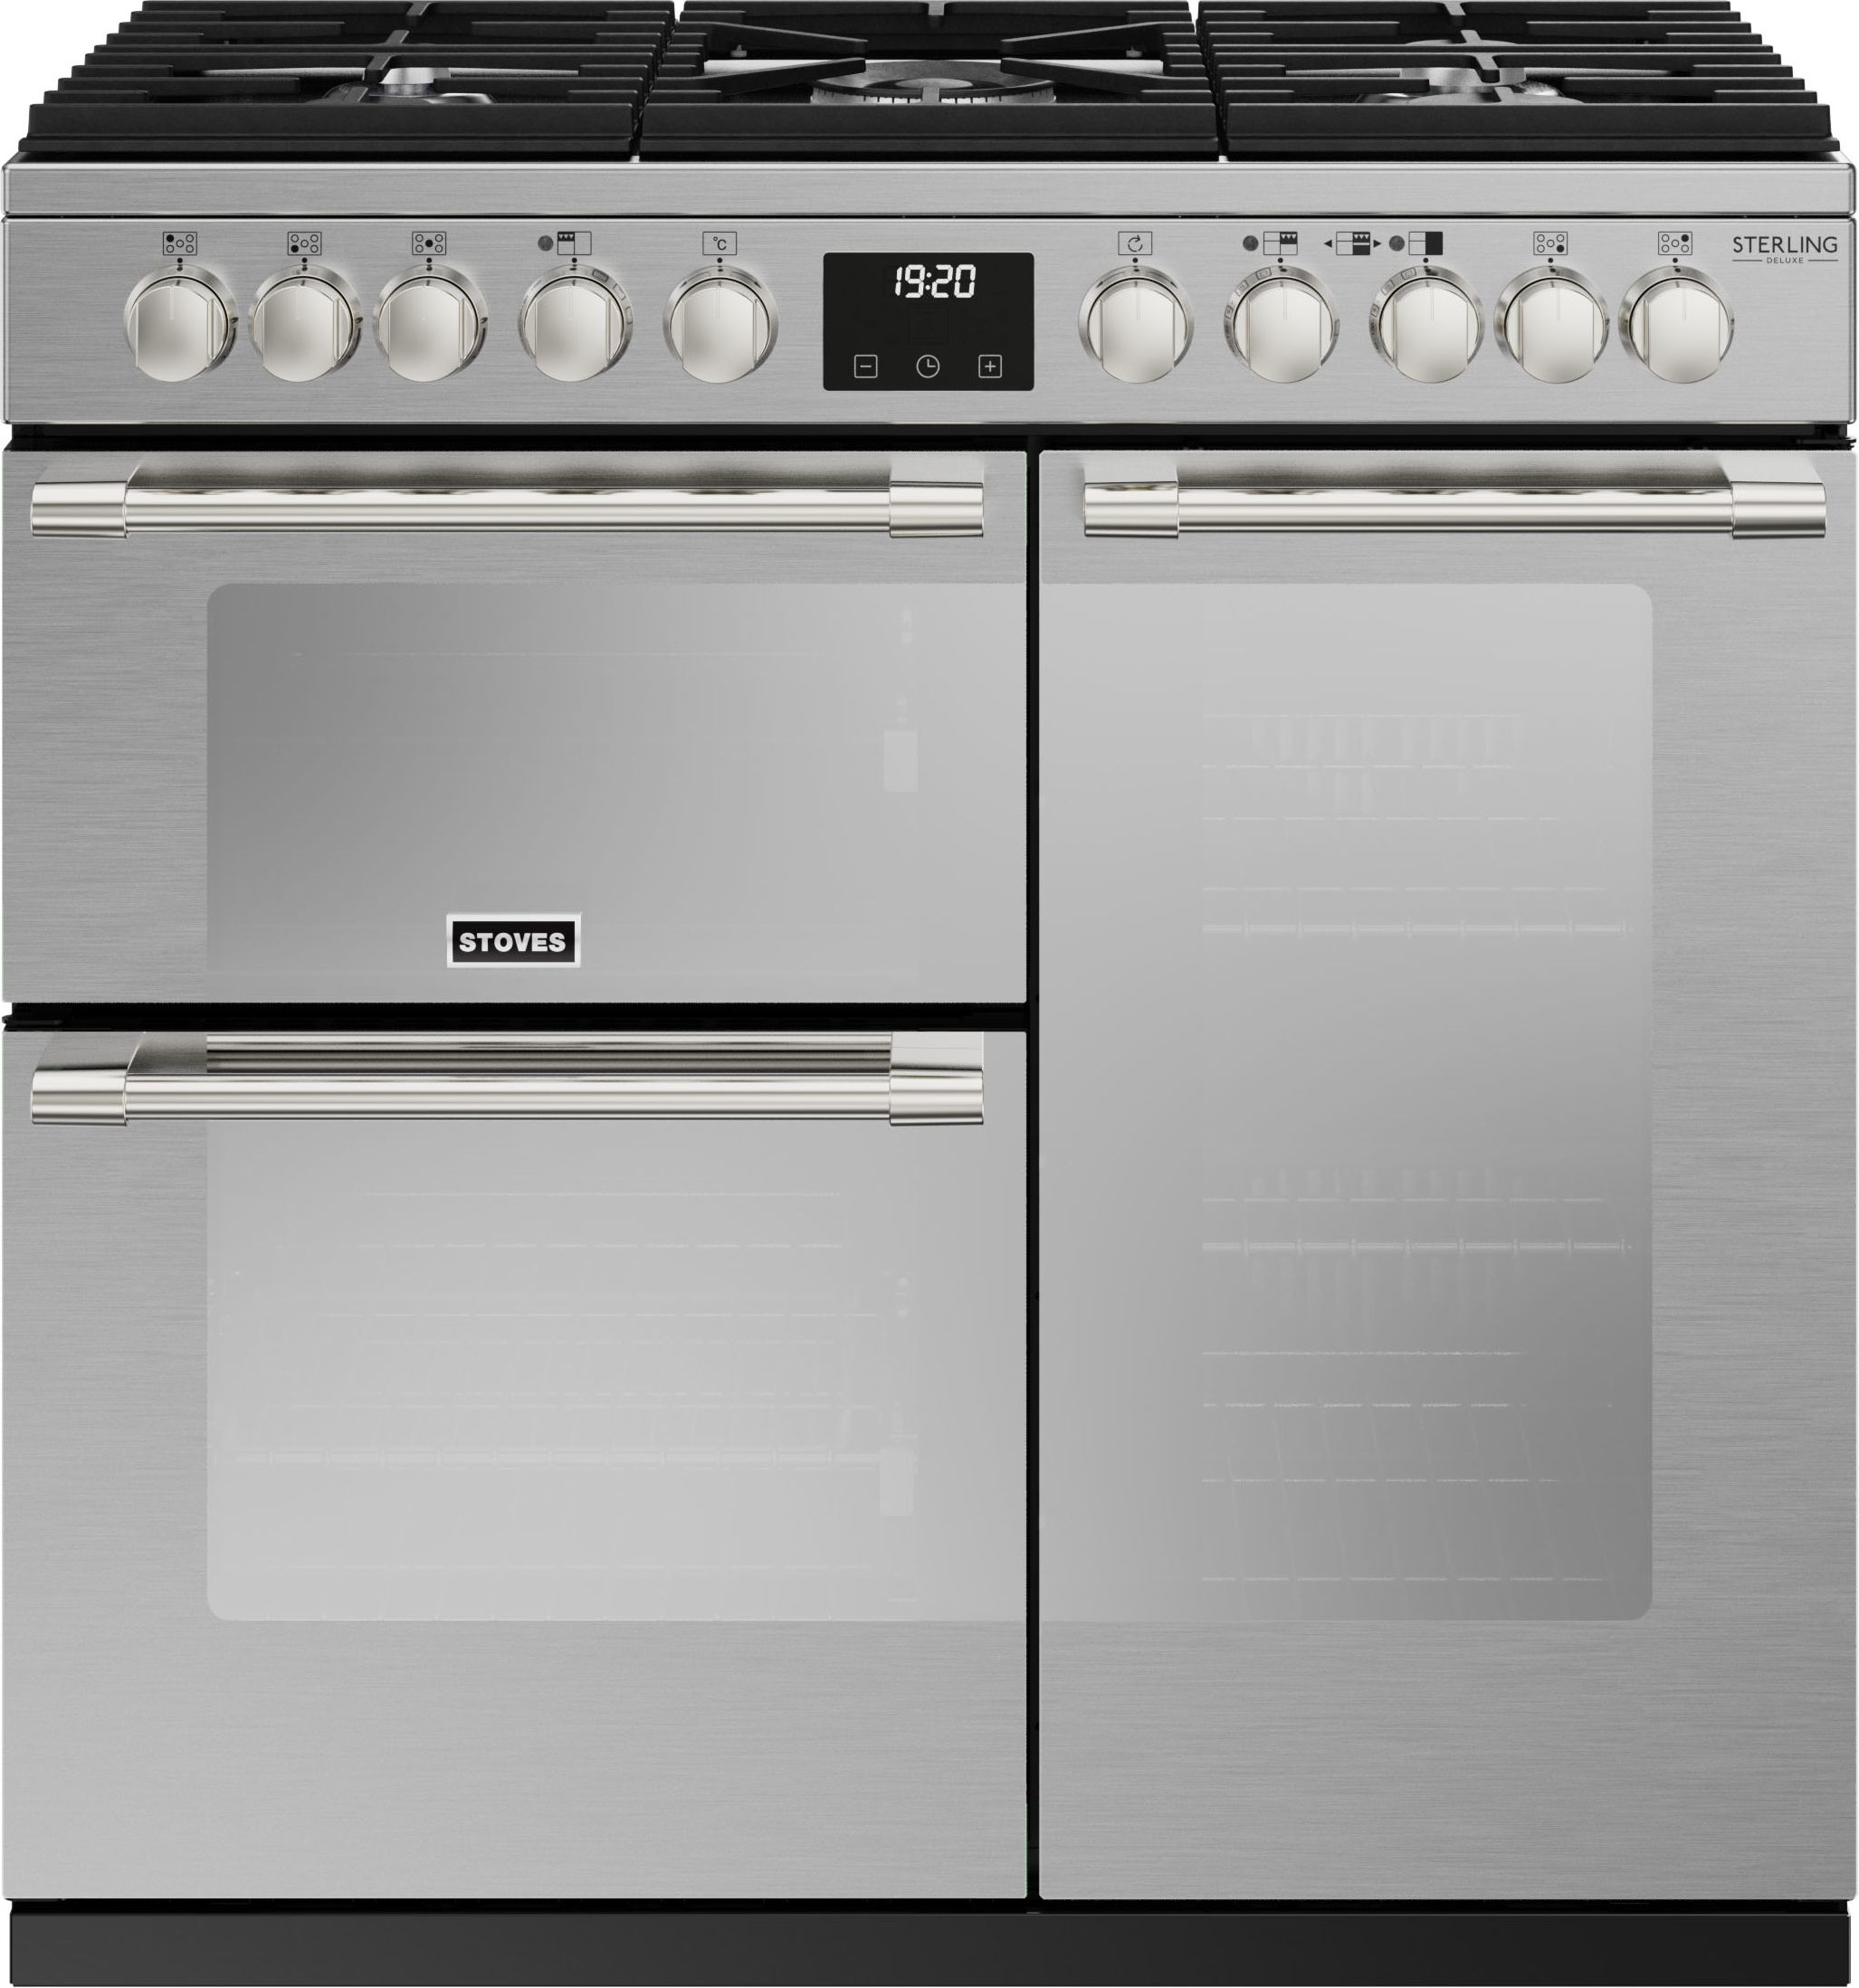 Stoves Sterling Deluxe ST DX STER D900DF SS 90cm Dual Fuel Range Cooker - Stainless Steel - A/A/A Rated, Stainless Steel